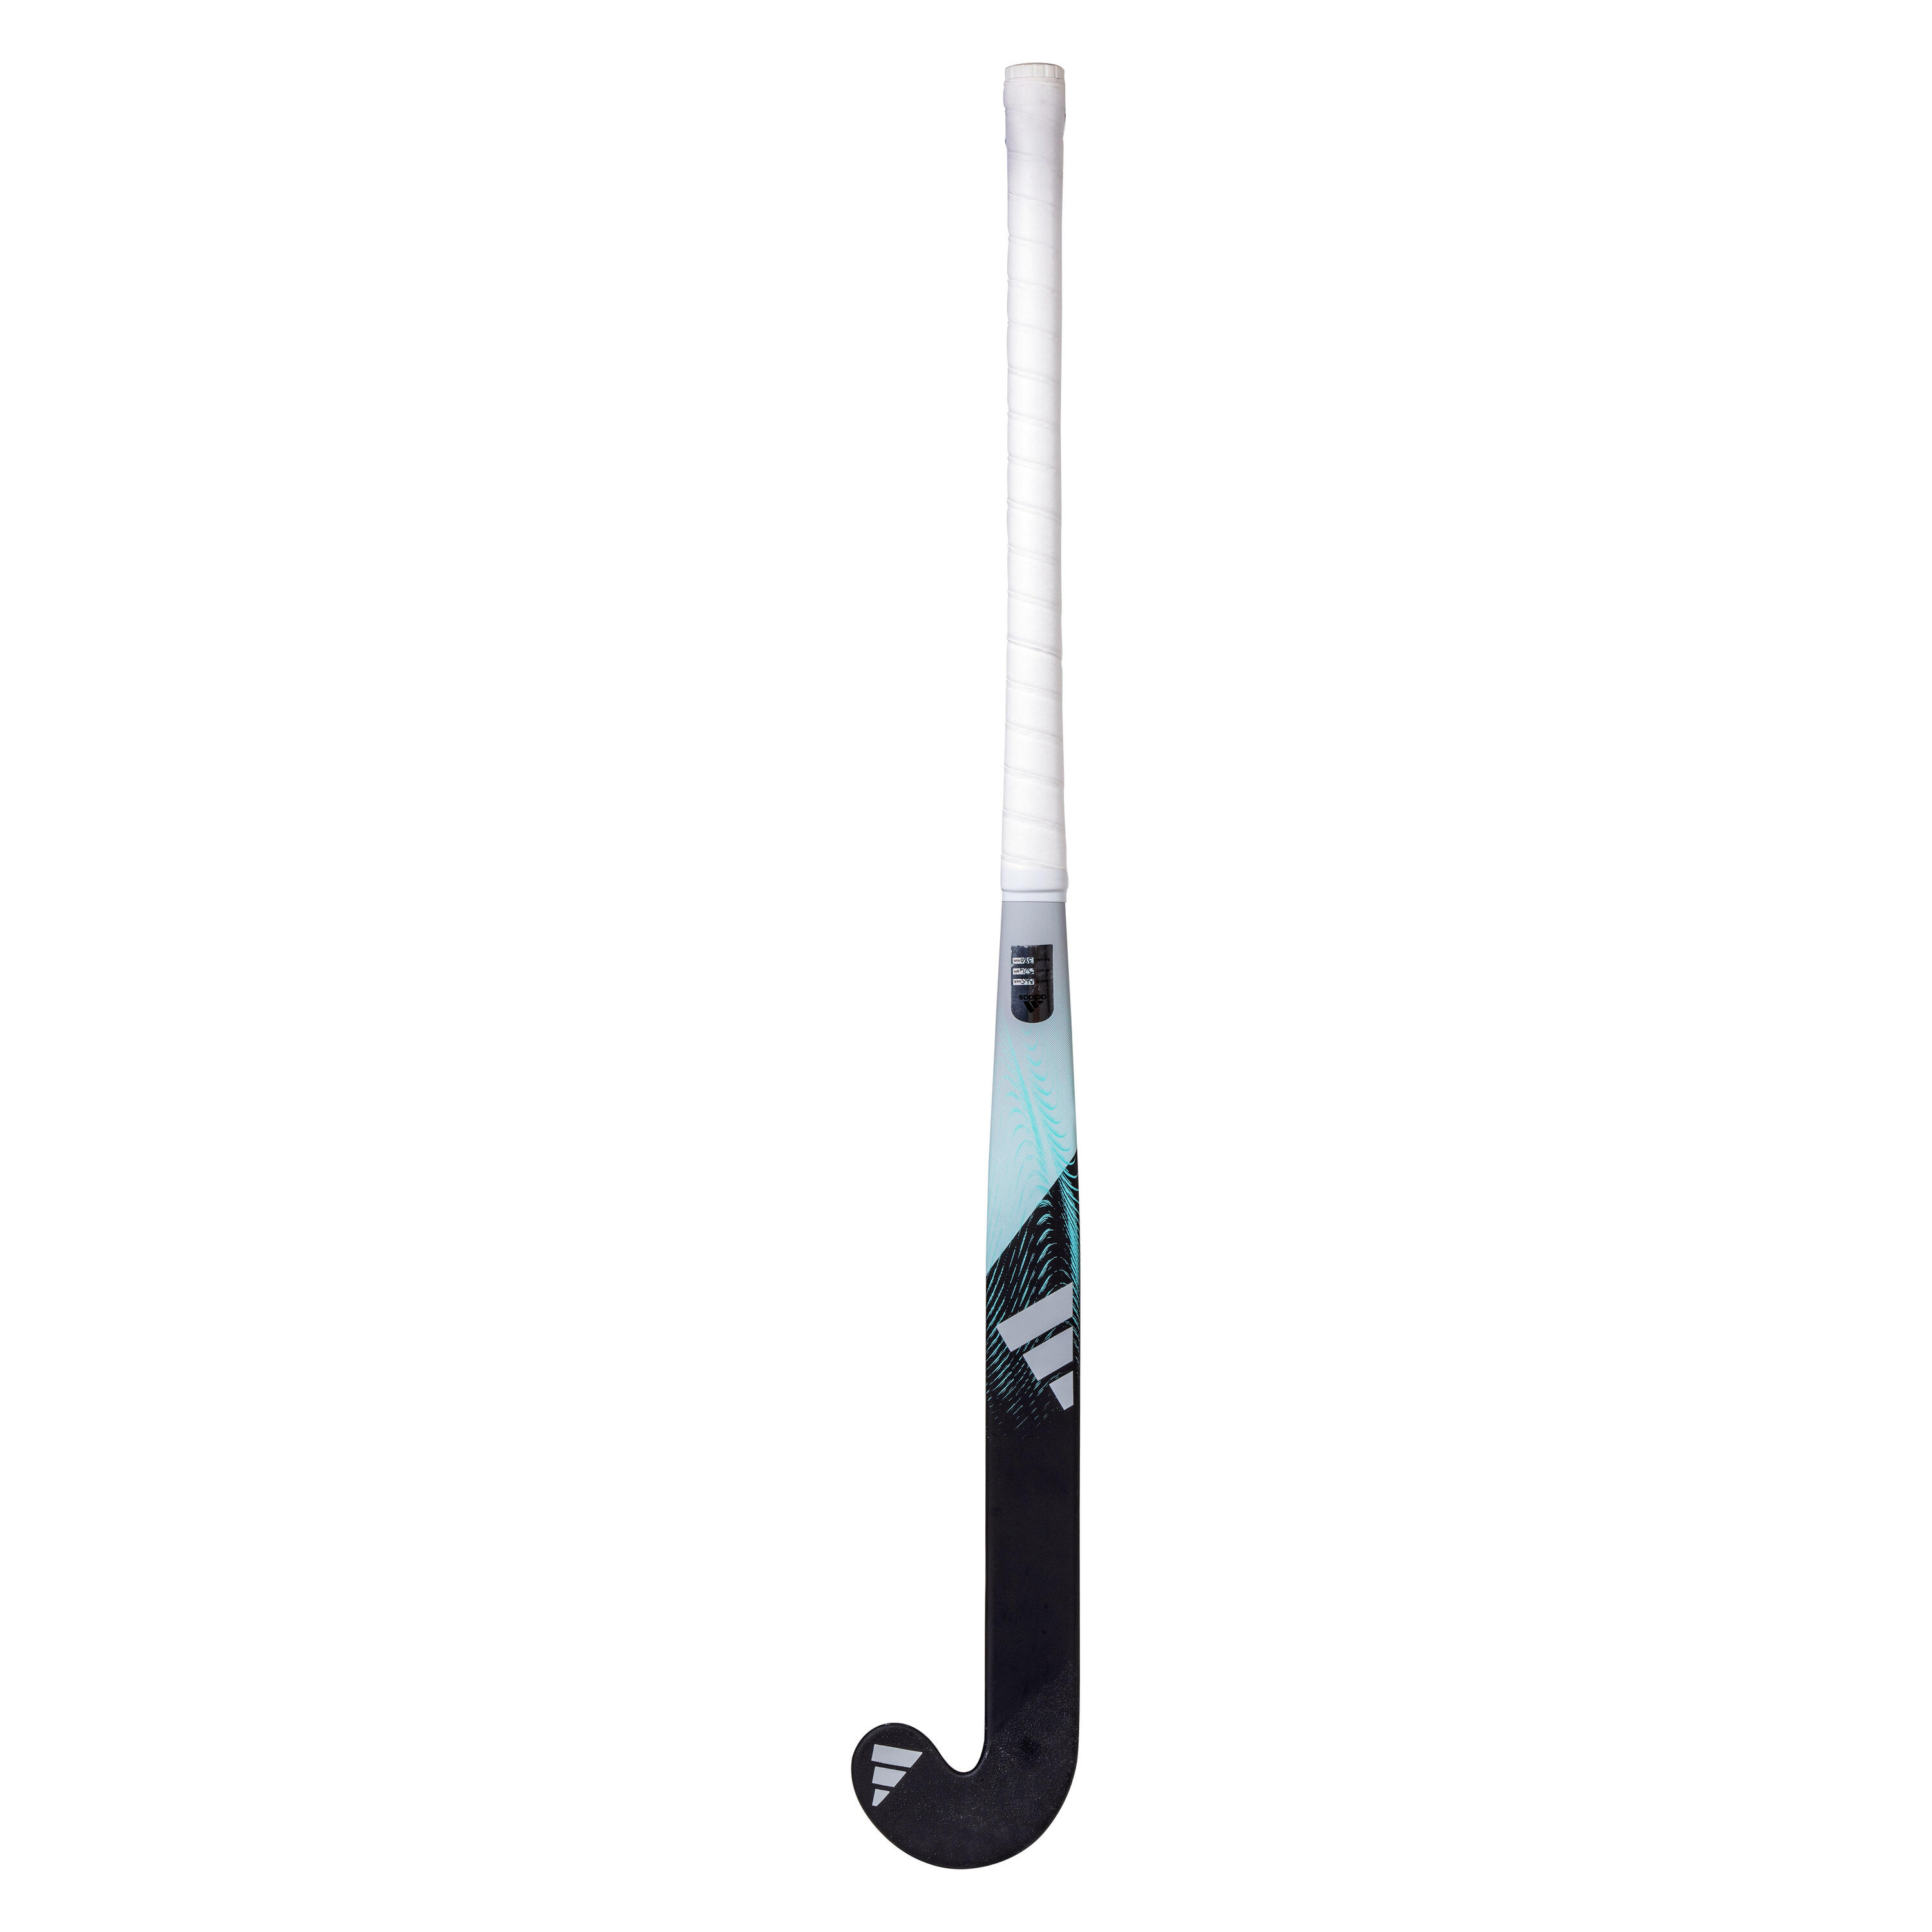 Adult Intermediate 20% Carbon Mid Bow Field Hockey Stick Fabela .7 - Black/Turquoise 5/12